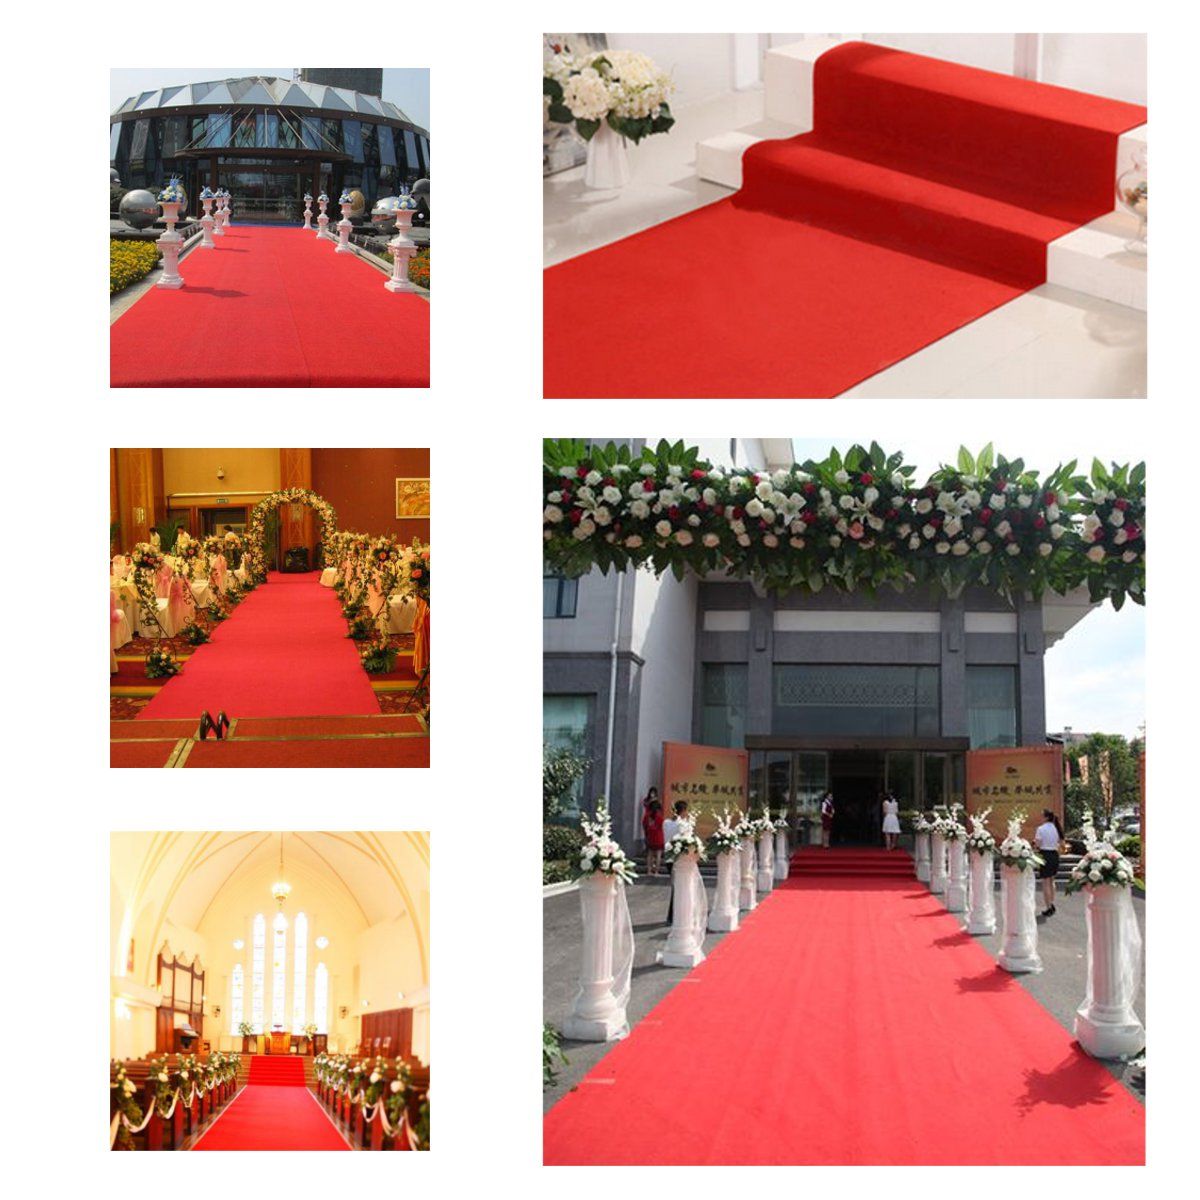 40ftx4ft-Large-Red-Carpet-Wedding-Birthday-Aisle-Floor-Runner-Hollywood-Party-Decoration-Prop-1399151